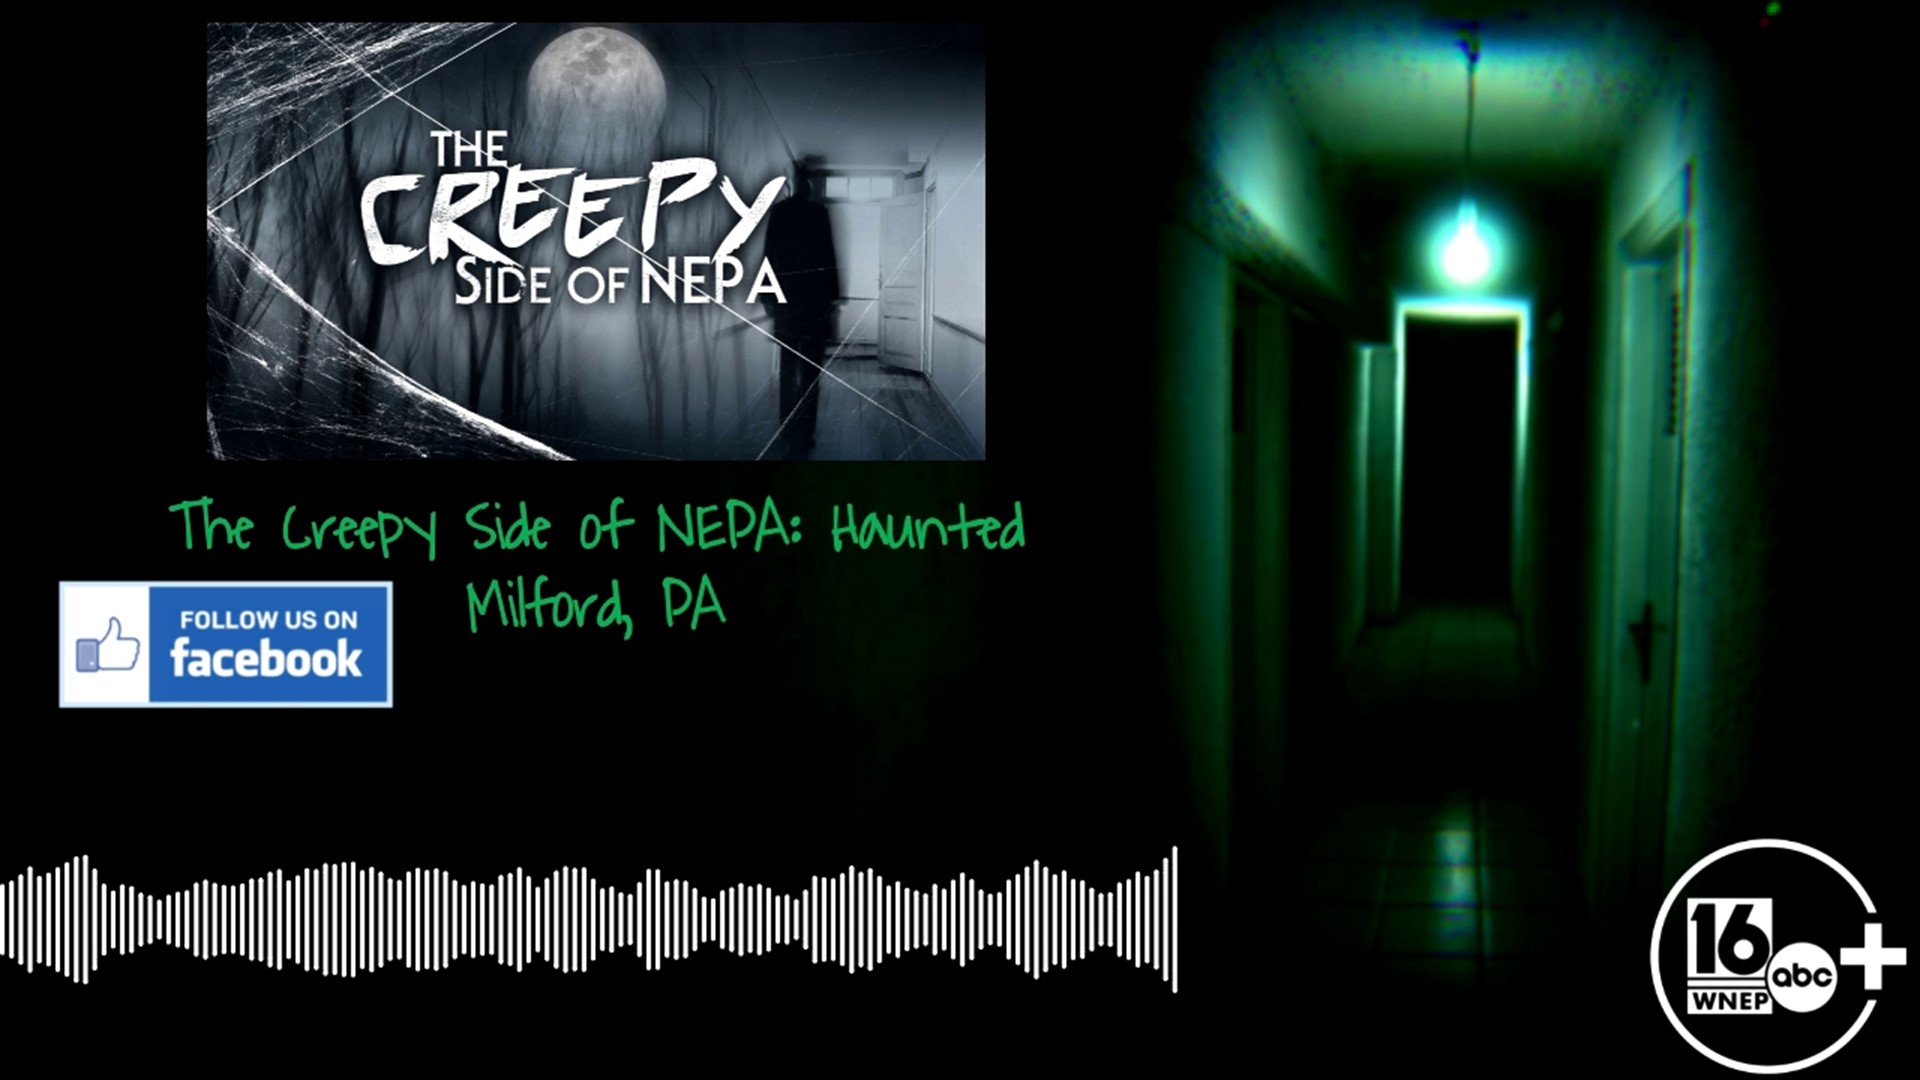 On this episode of The Creepy Side of NEPA, Tim Kelly, founder and guide for the Haunted Milford Walking Tour, shares his favorite stories with us.